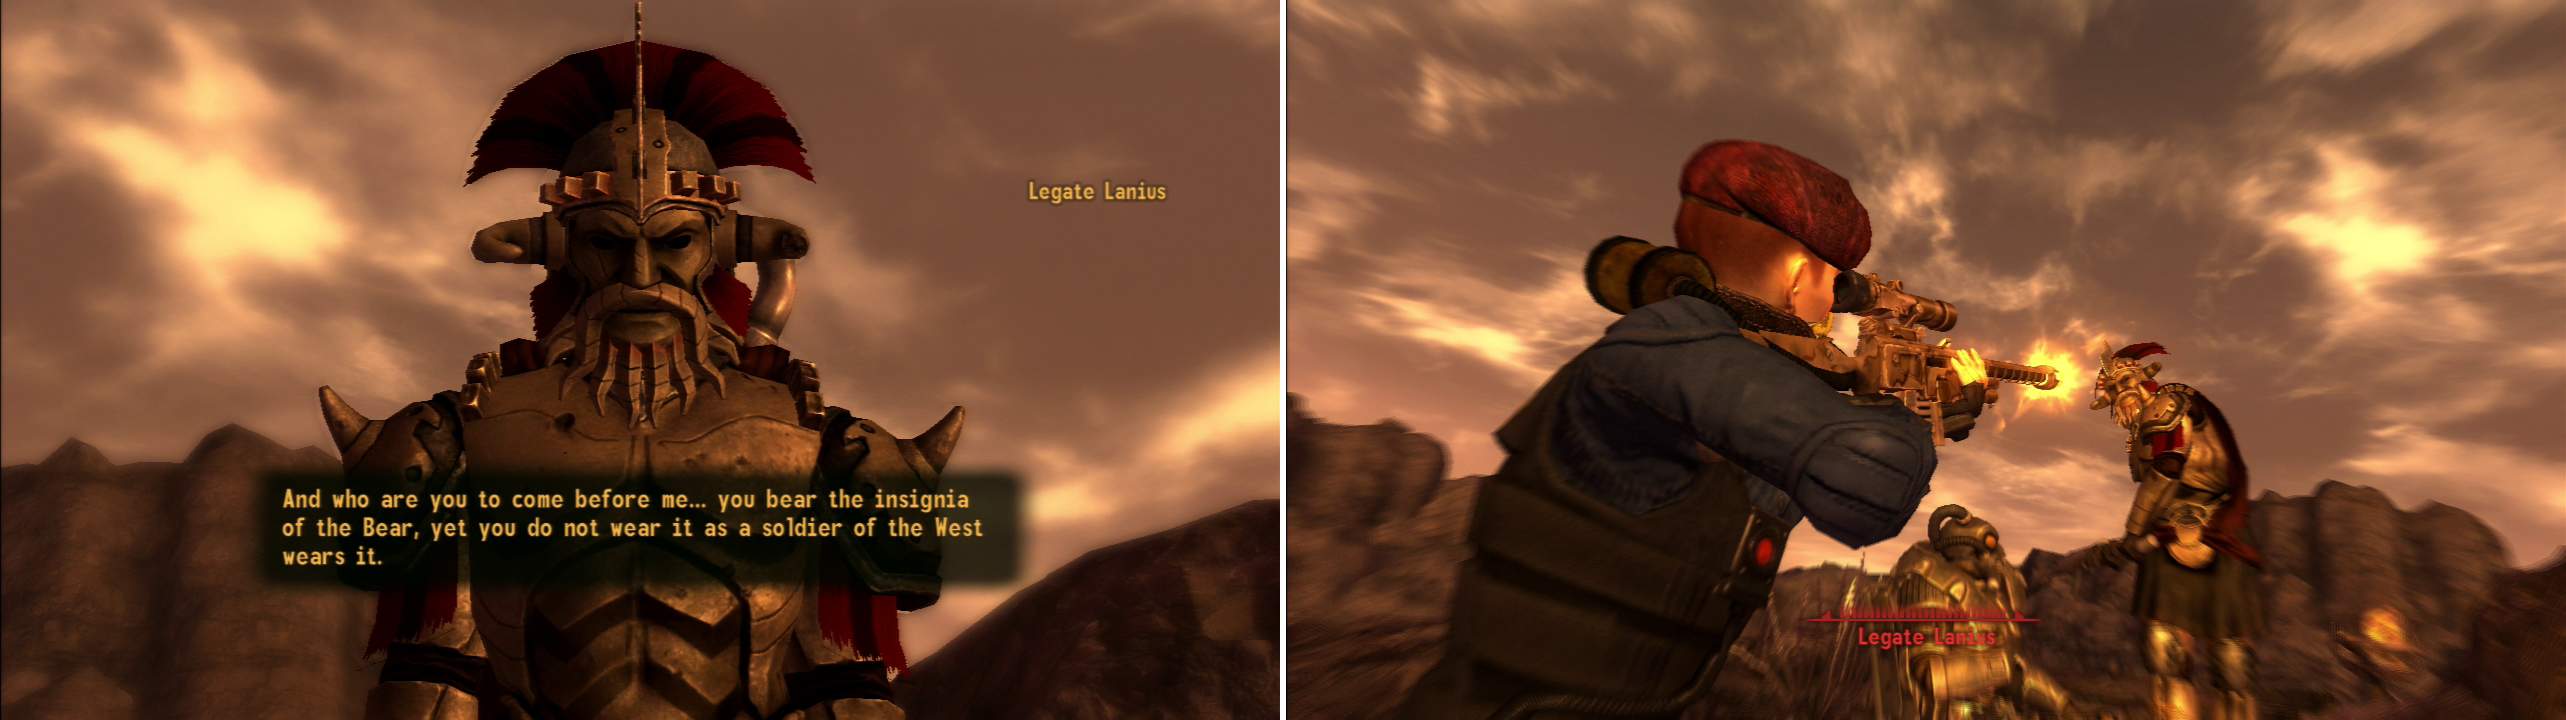 Confront the Legate Lanius in his camp and either convince him to withdraw (left) or defeat him in combat (right). Once he falls, the Mojave has been won for the NCR.